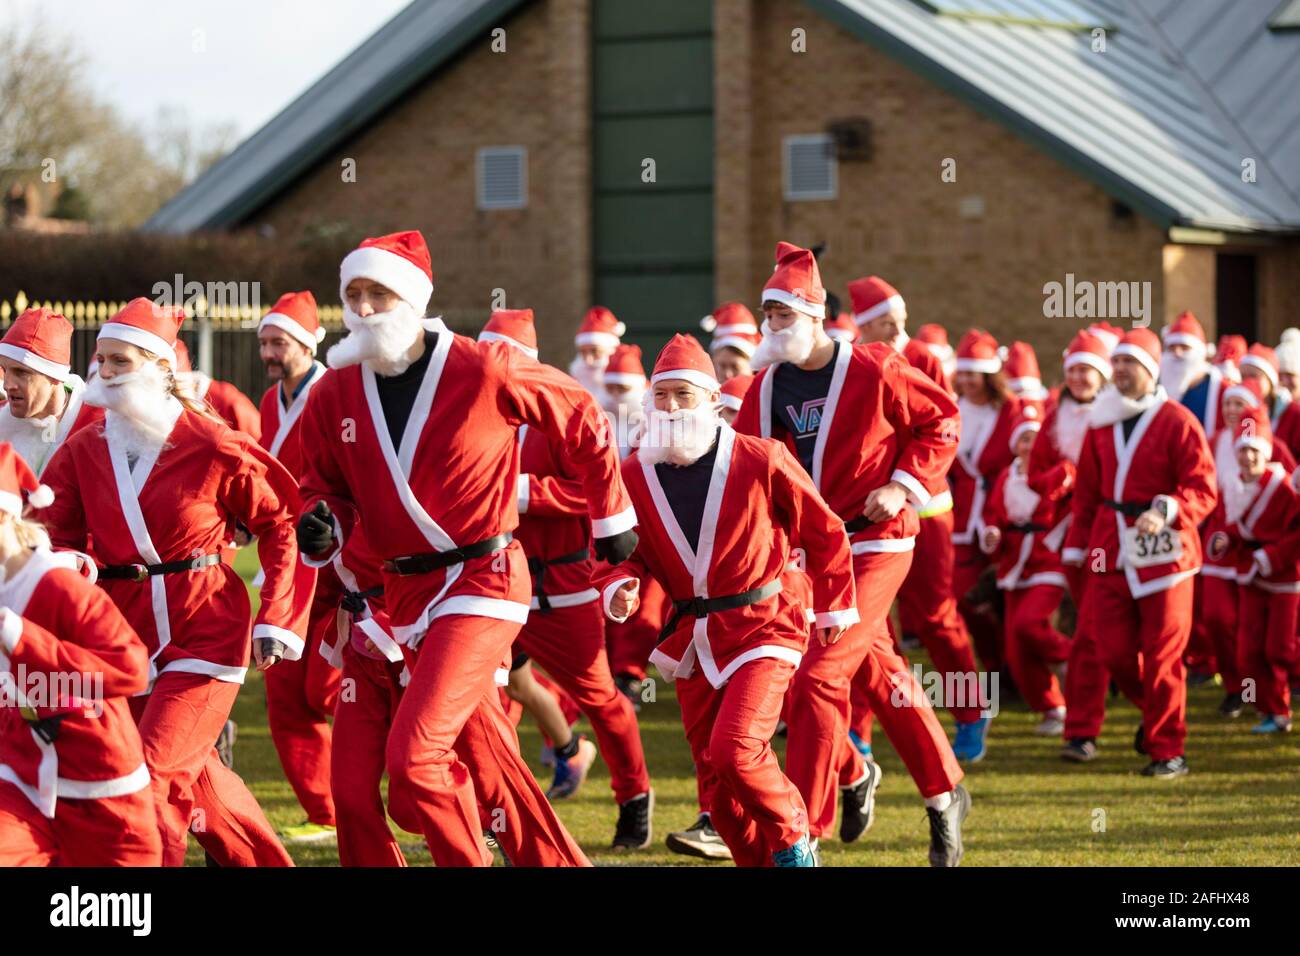 Oxfordshire, UK - December 14th 2019: People dressed as Father Christmas take part in the annual santa fun run. Stock Photo